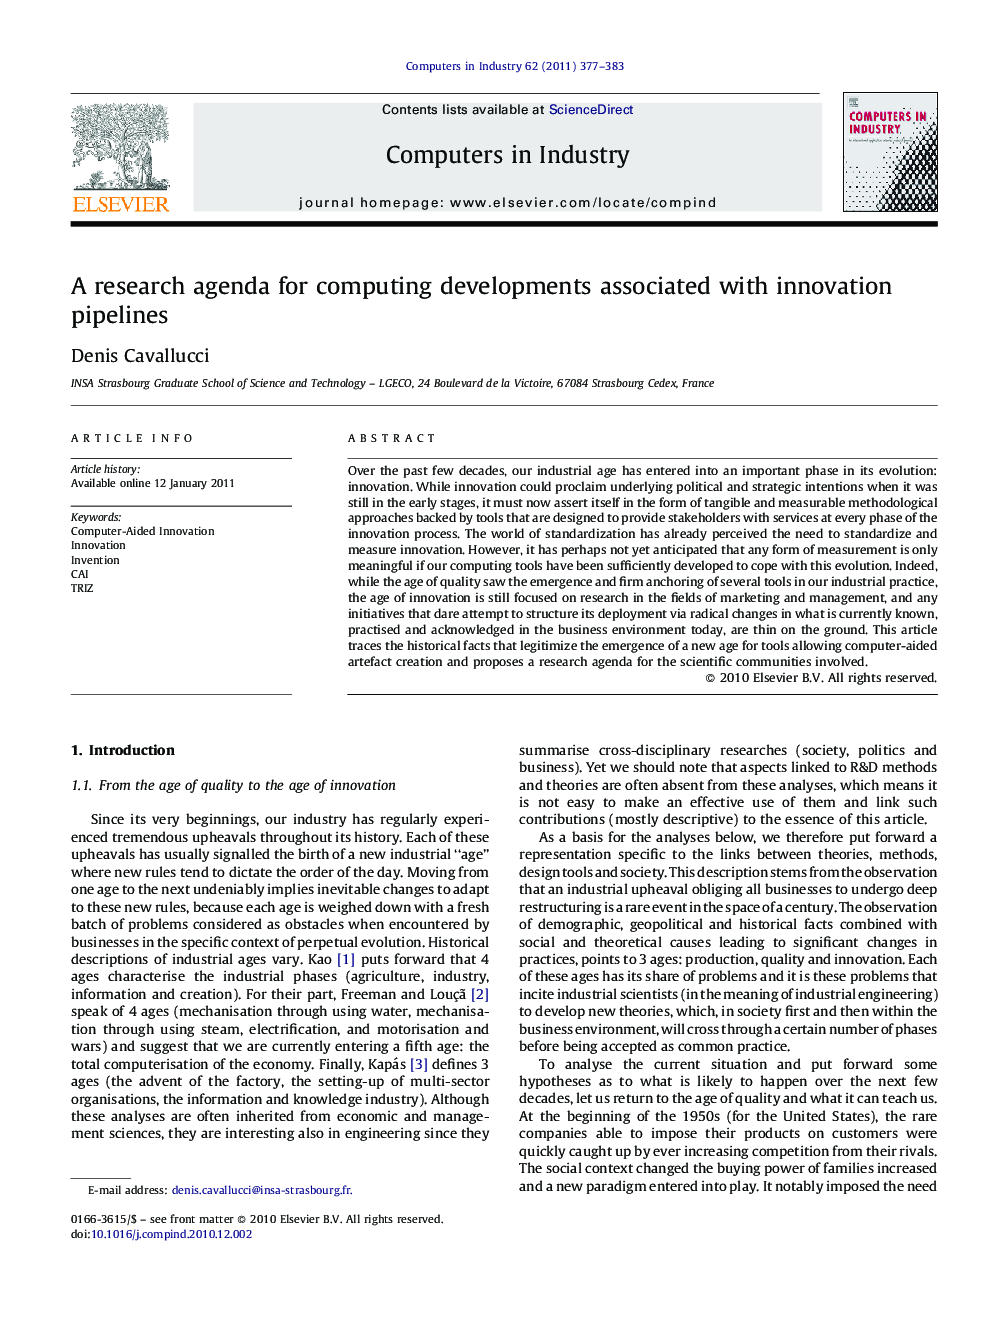 A research agenda for computing developments associated with innovation pipelines